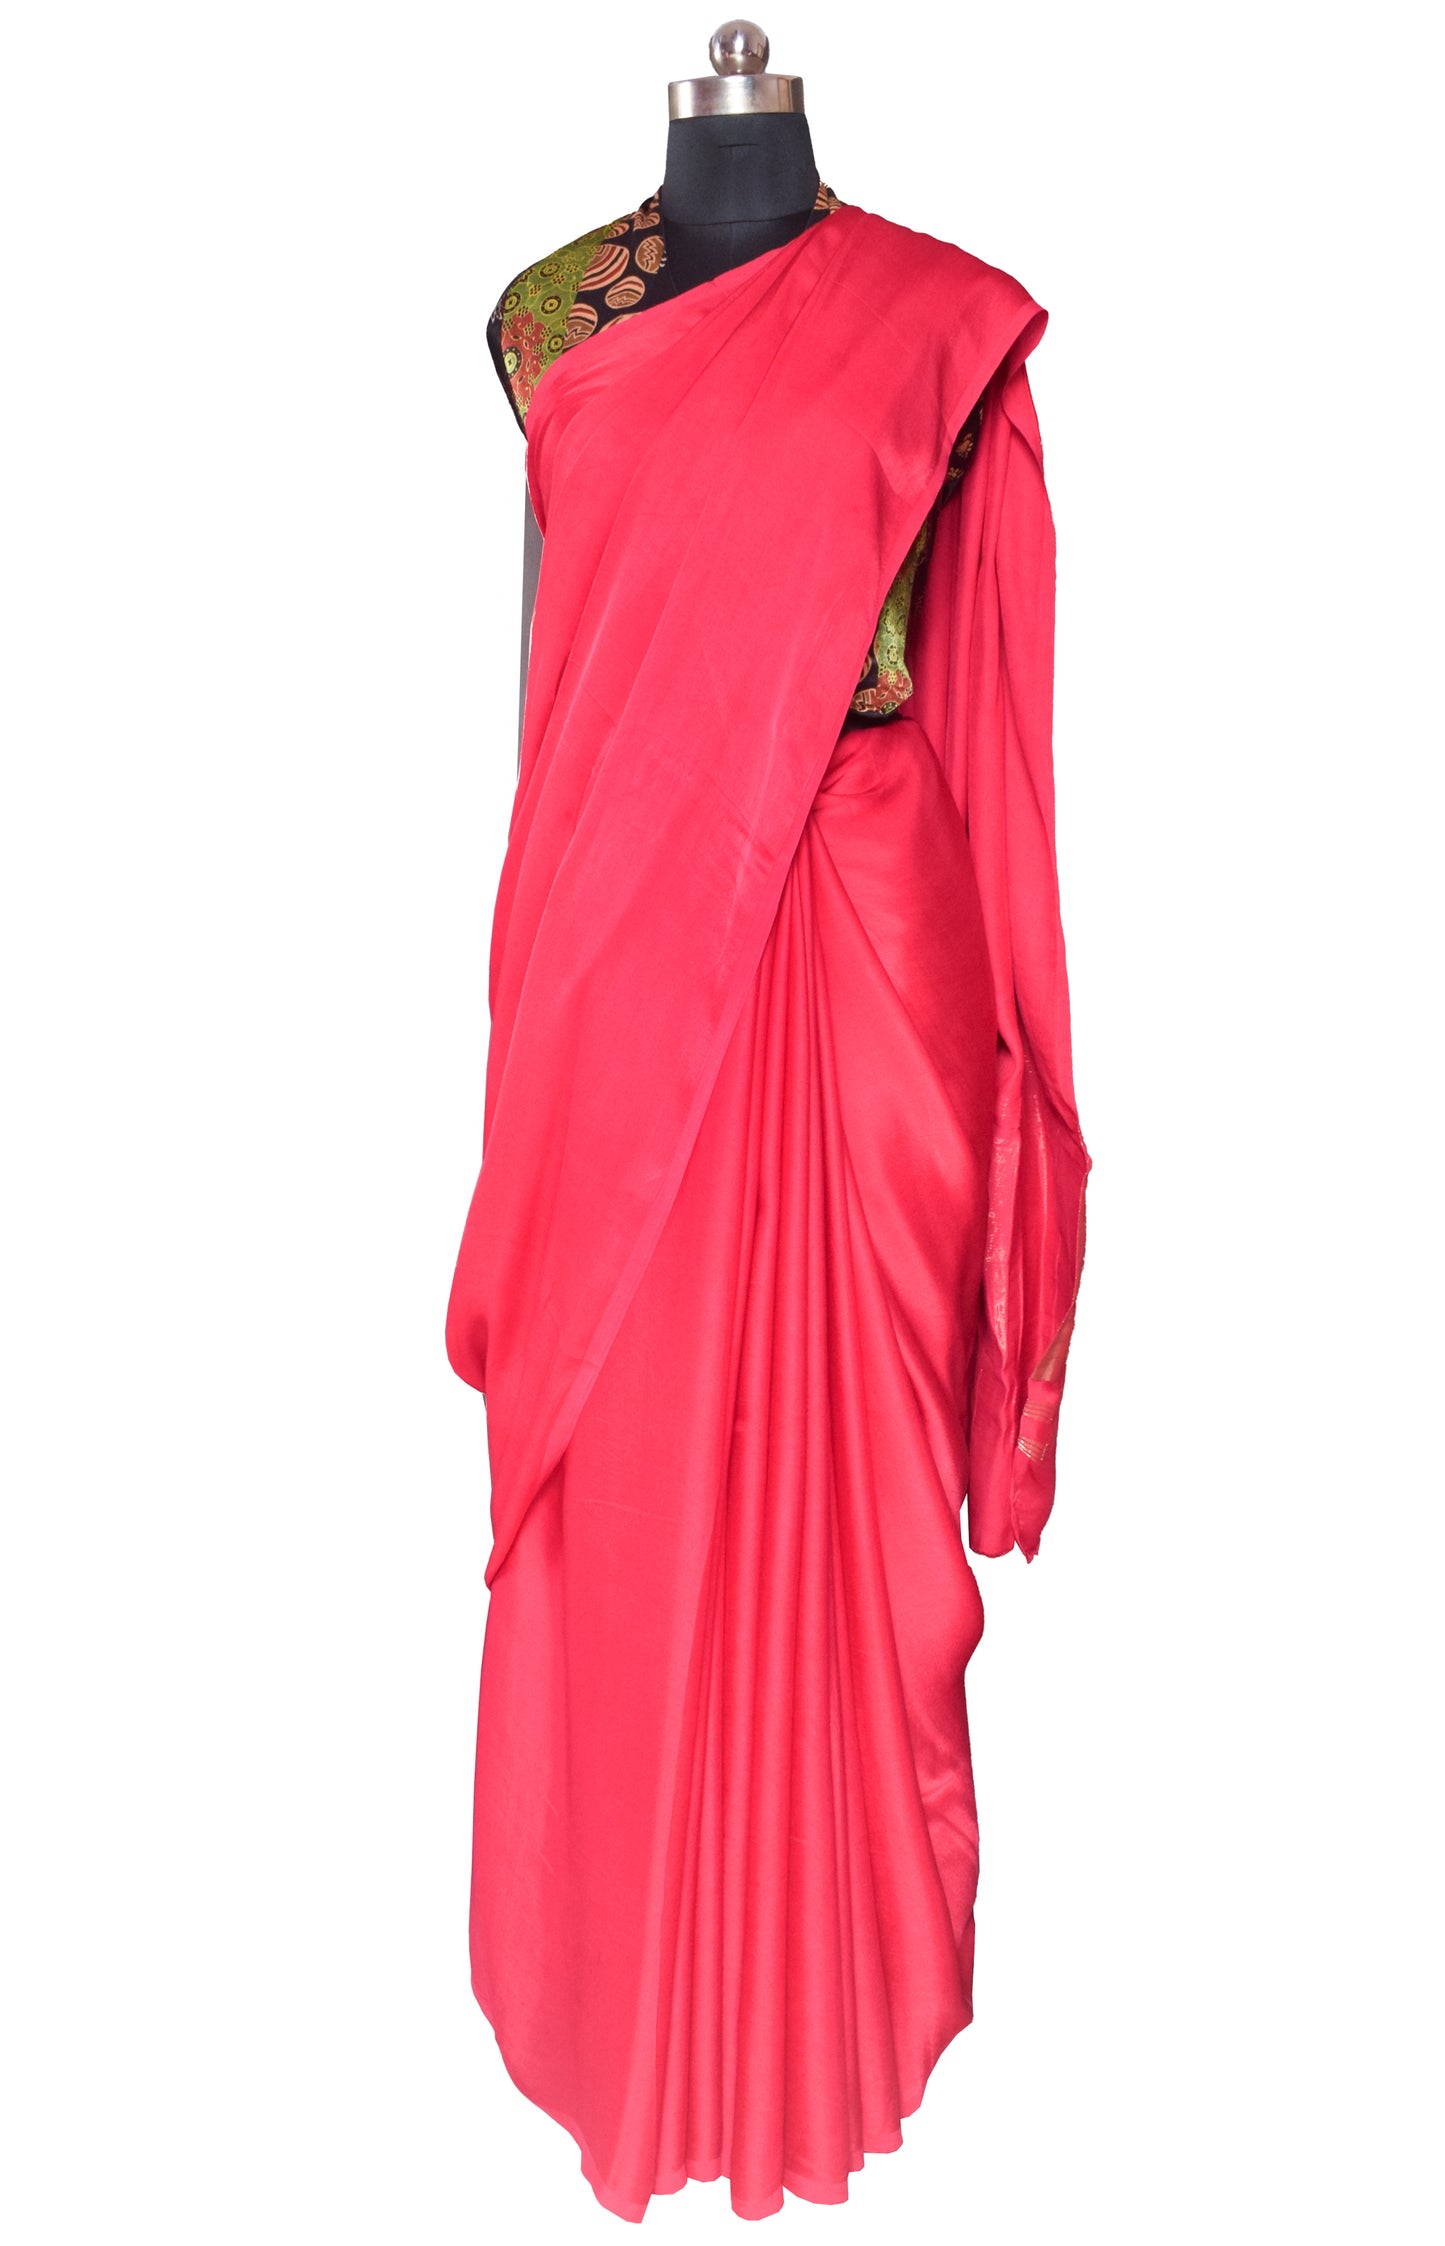 Plain Dyeing Modal Silk Plain Dyed Saree   with Golden Border  - With Blouse Piece - 6 Mtr Length    -  SKU : 0071